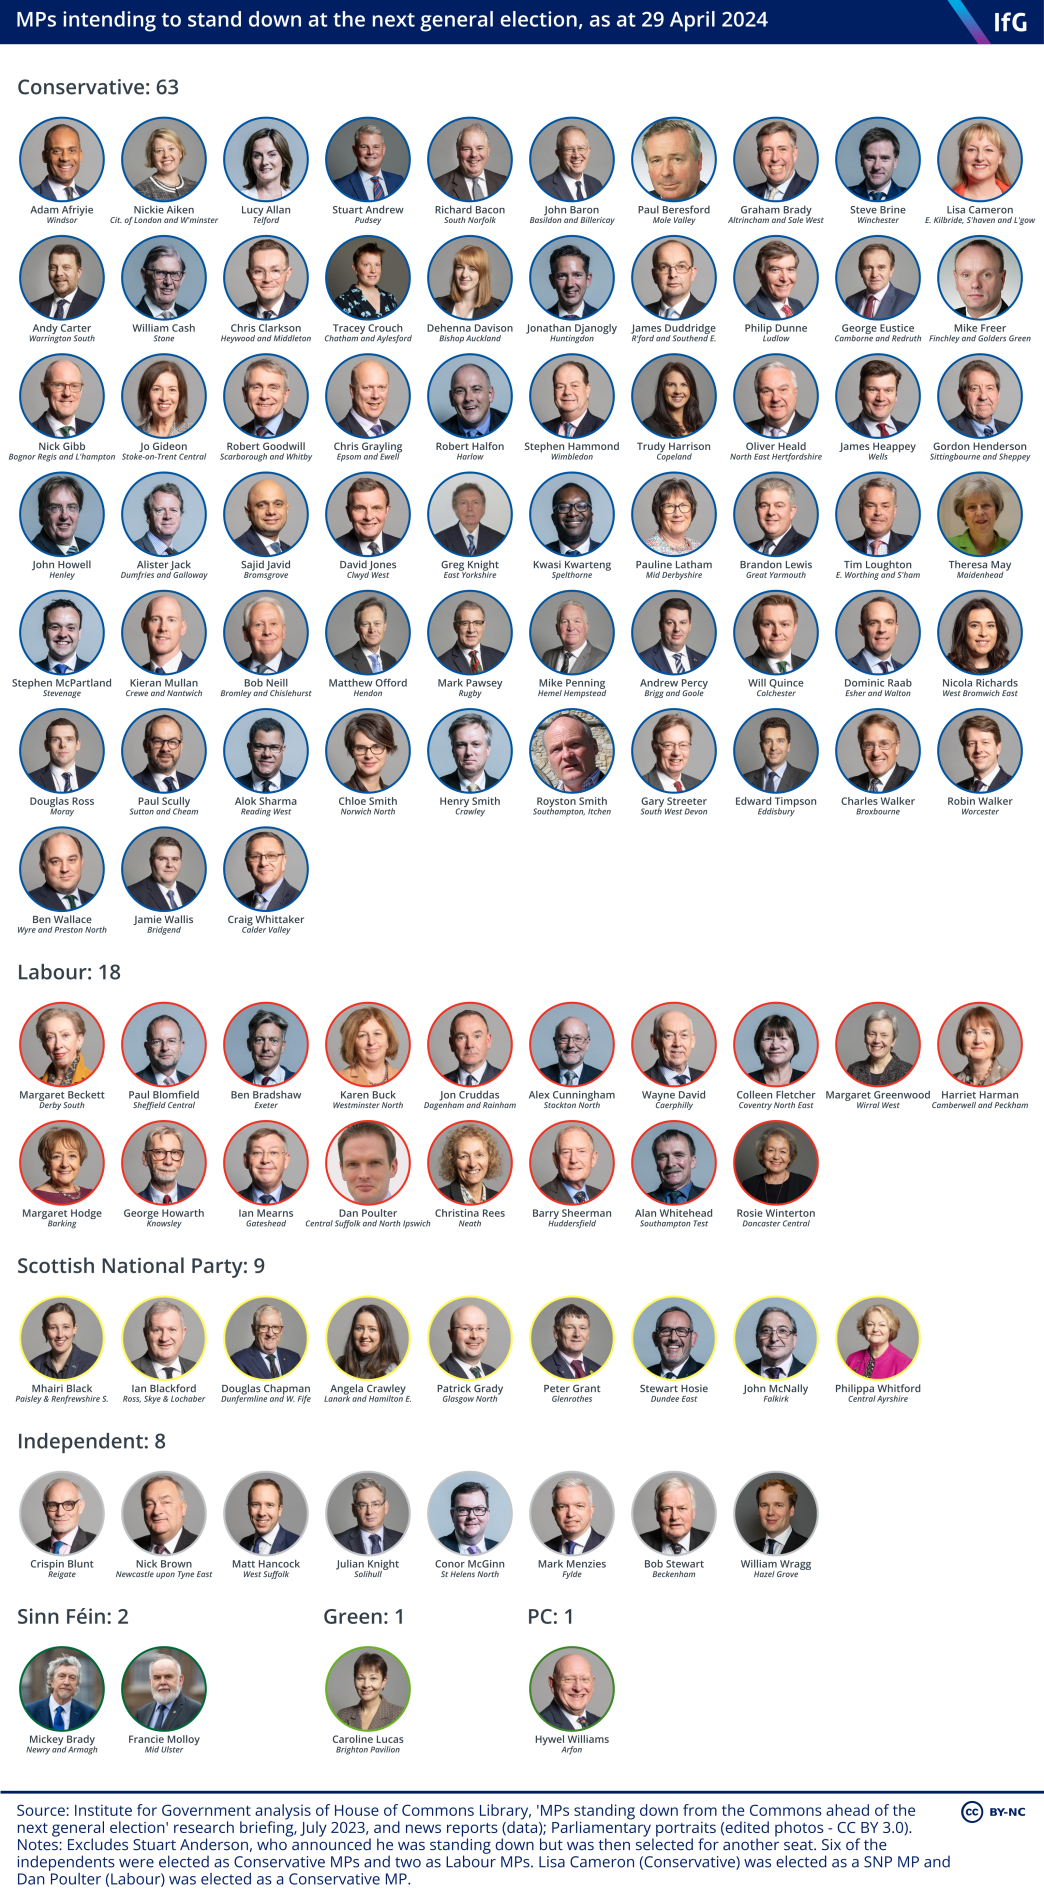 An Institute for Government graphic showing MPs intending to stand down at the next general election, as at 29 April 2024, where there are 102 MPs standing down in total, including 63 Conservative and 18 Labour MPs, and featuring people such as Theresa May, Dominic Raab and Matt Hancock.